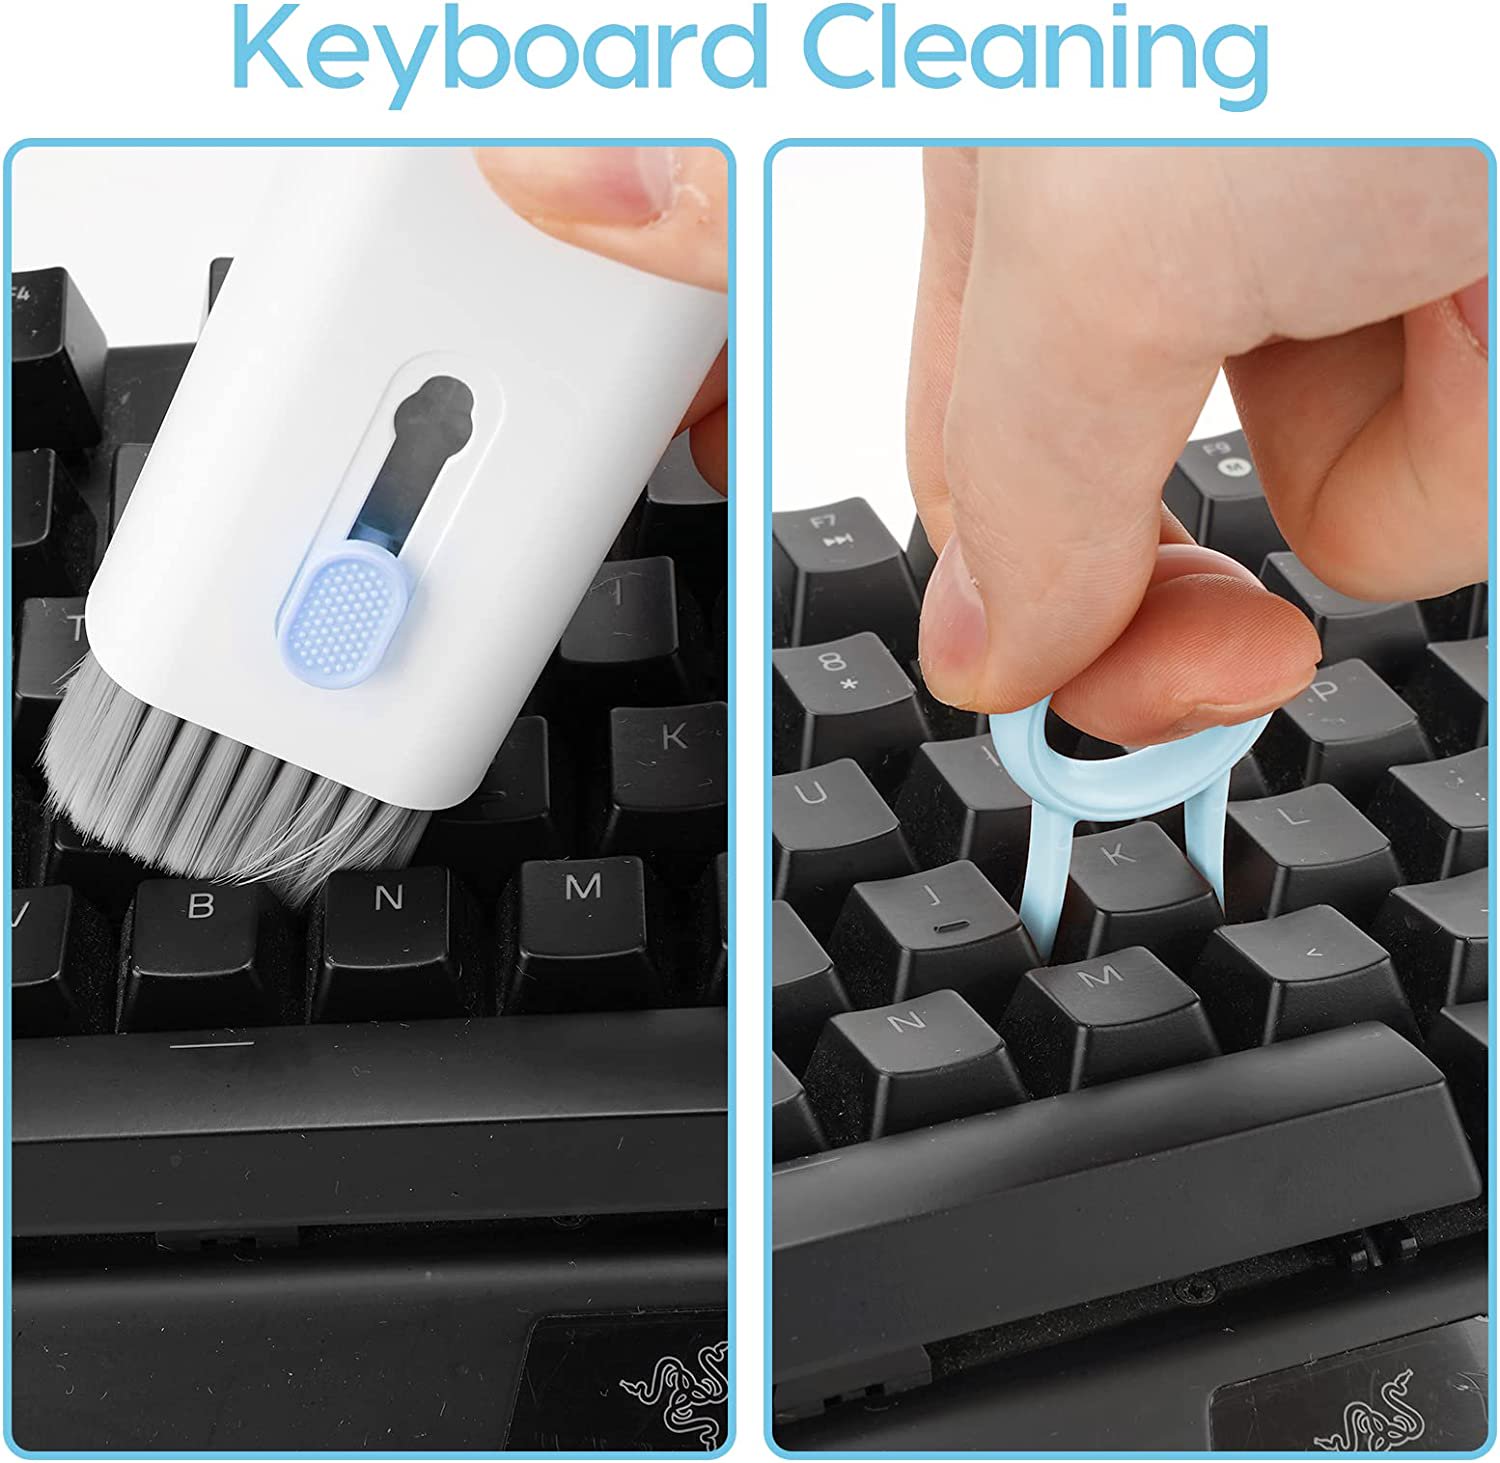 7-in-1 Electronic Cleaner Kit for Airpods Laptop Cleaner, Keyboard Cleaner  Kit, Portable Cleaning Kit with Cleaning Pen Brush for iPhone iPad MacBook